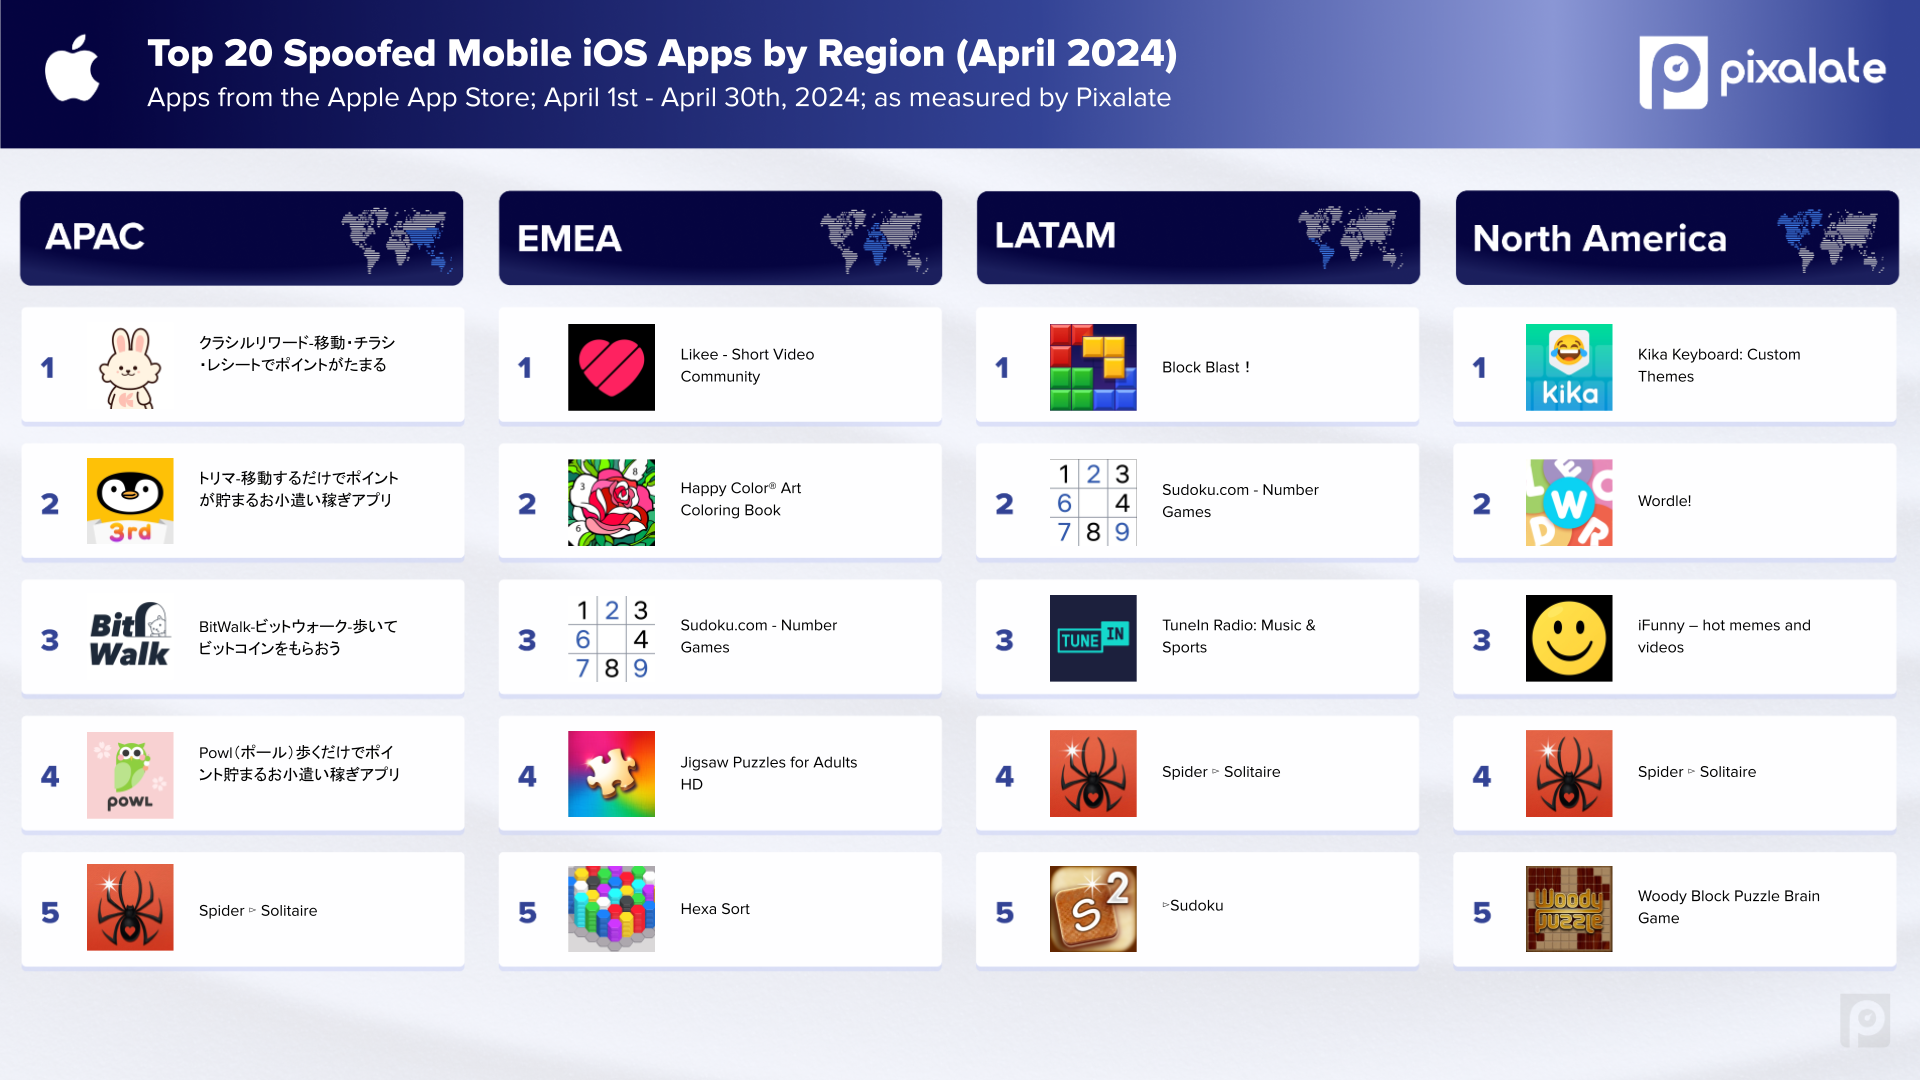 Top Apple App Store mobile apps at risk of spoofing in April 2024